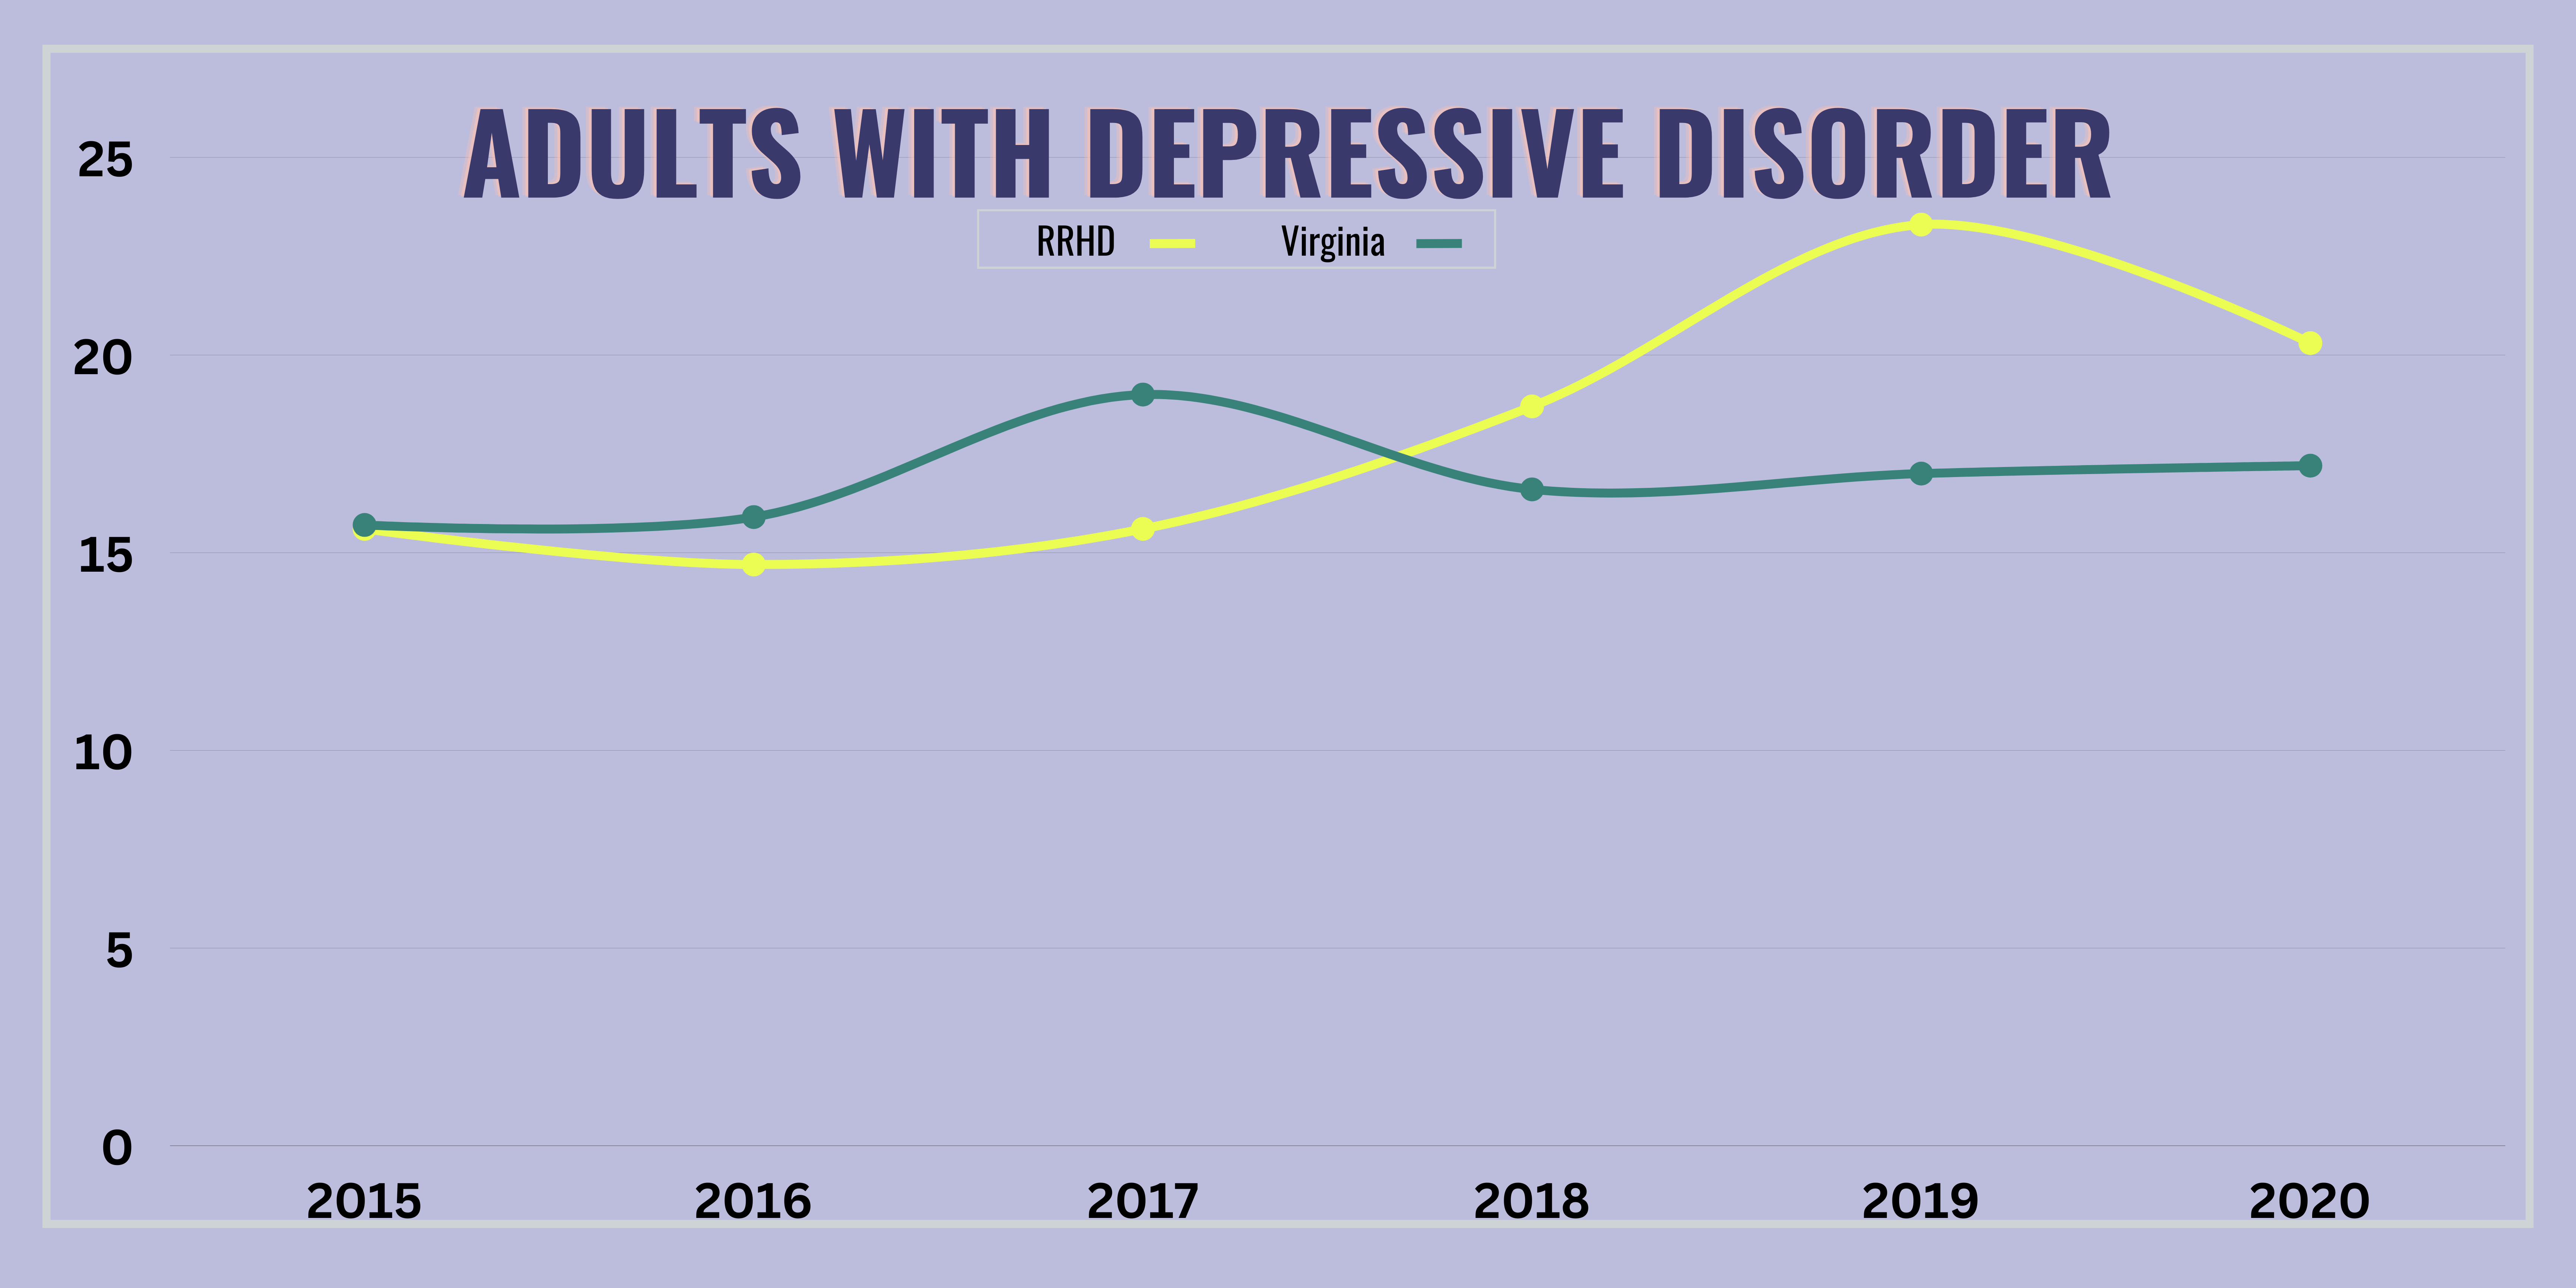 Adults with Depressive Disorder Graph
RRHD has experiencing an increase in adults with depressive disorder until 2019-2020. Virginia has remained steady. 